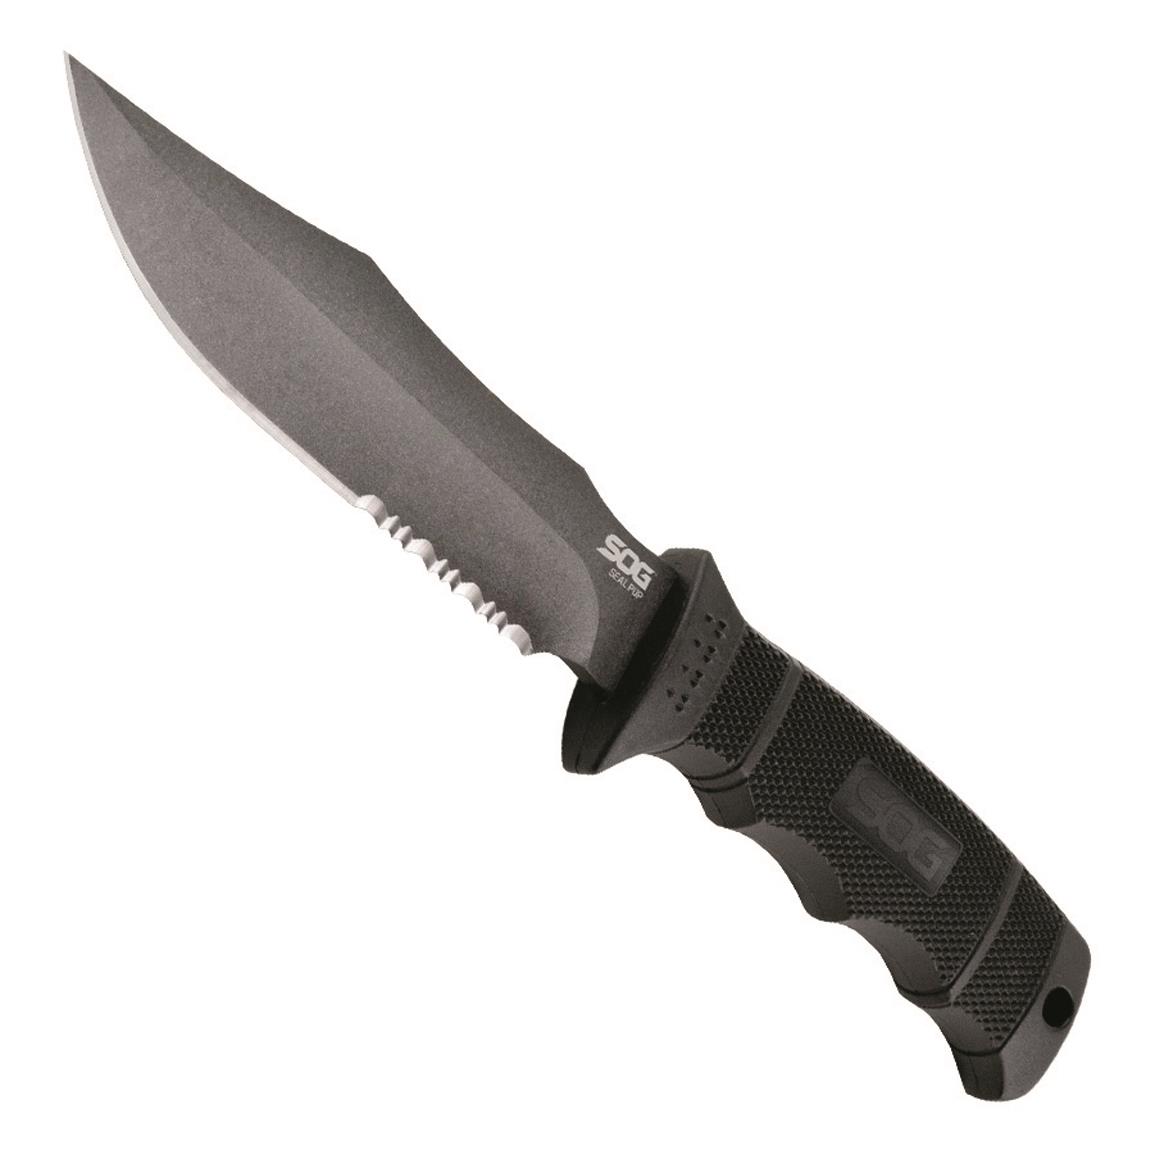 Partially-serrated clip-point blade